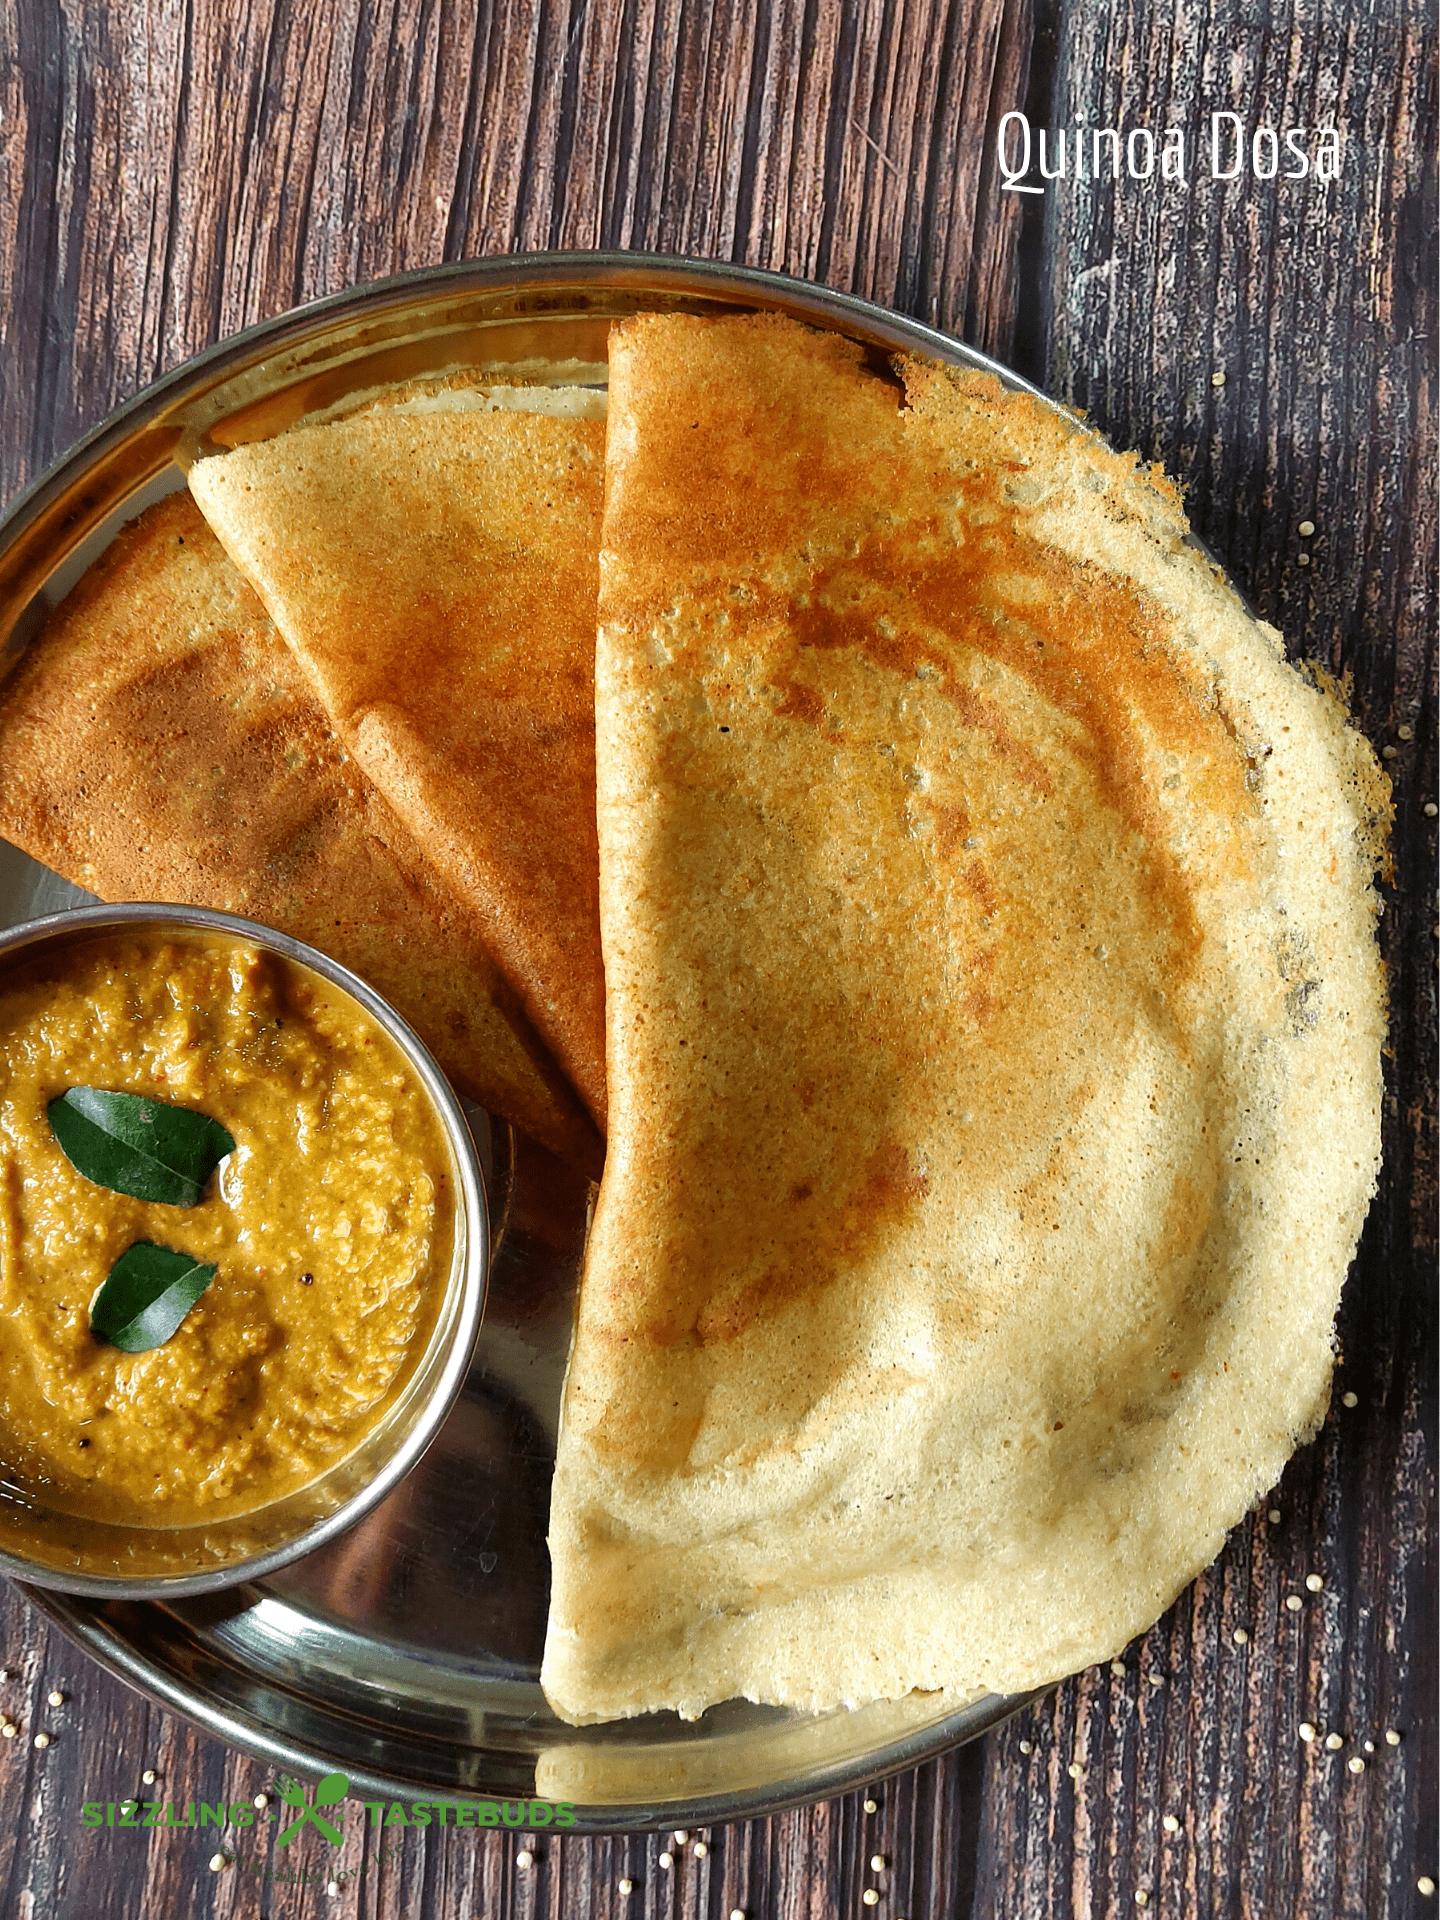 No Rice Quinoa Dosa is a dosa or Indian Savory Crepe made with Quinoa served for breakfast or brunch. This is diabetic friendly (made without rice) , Gluten Free, and Vegan.